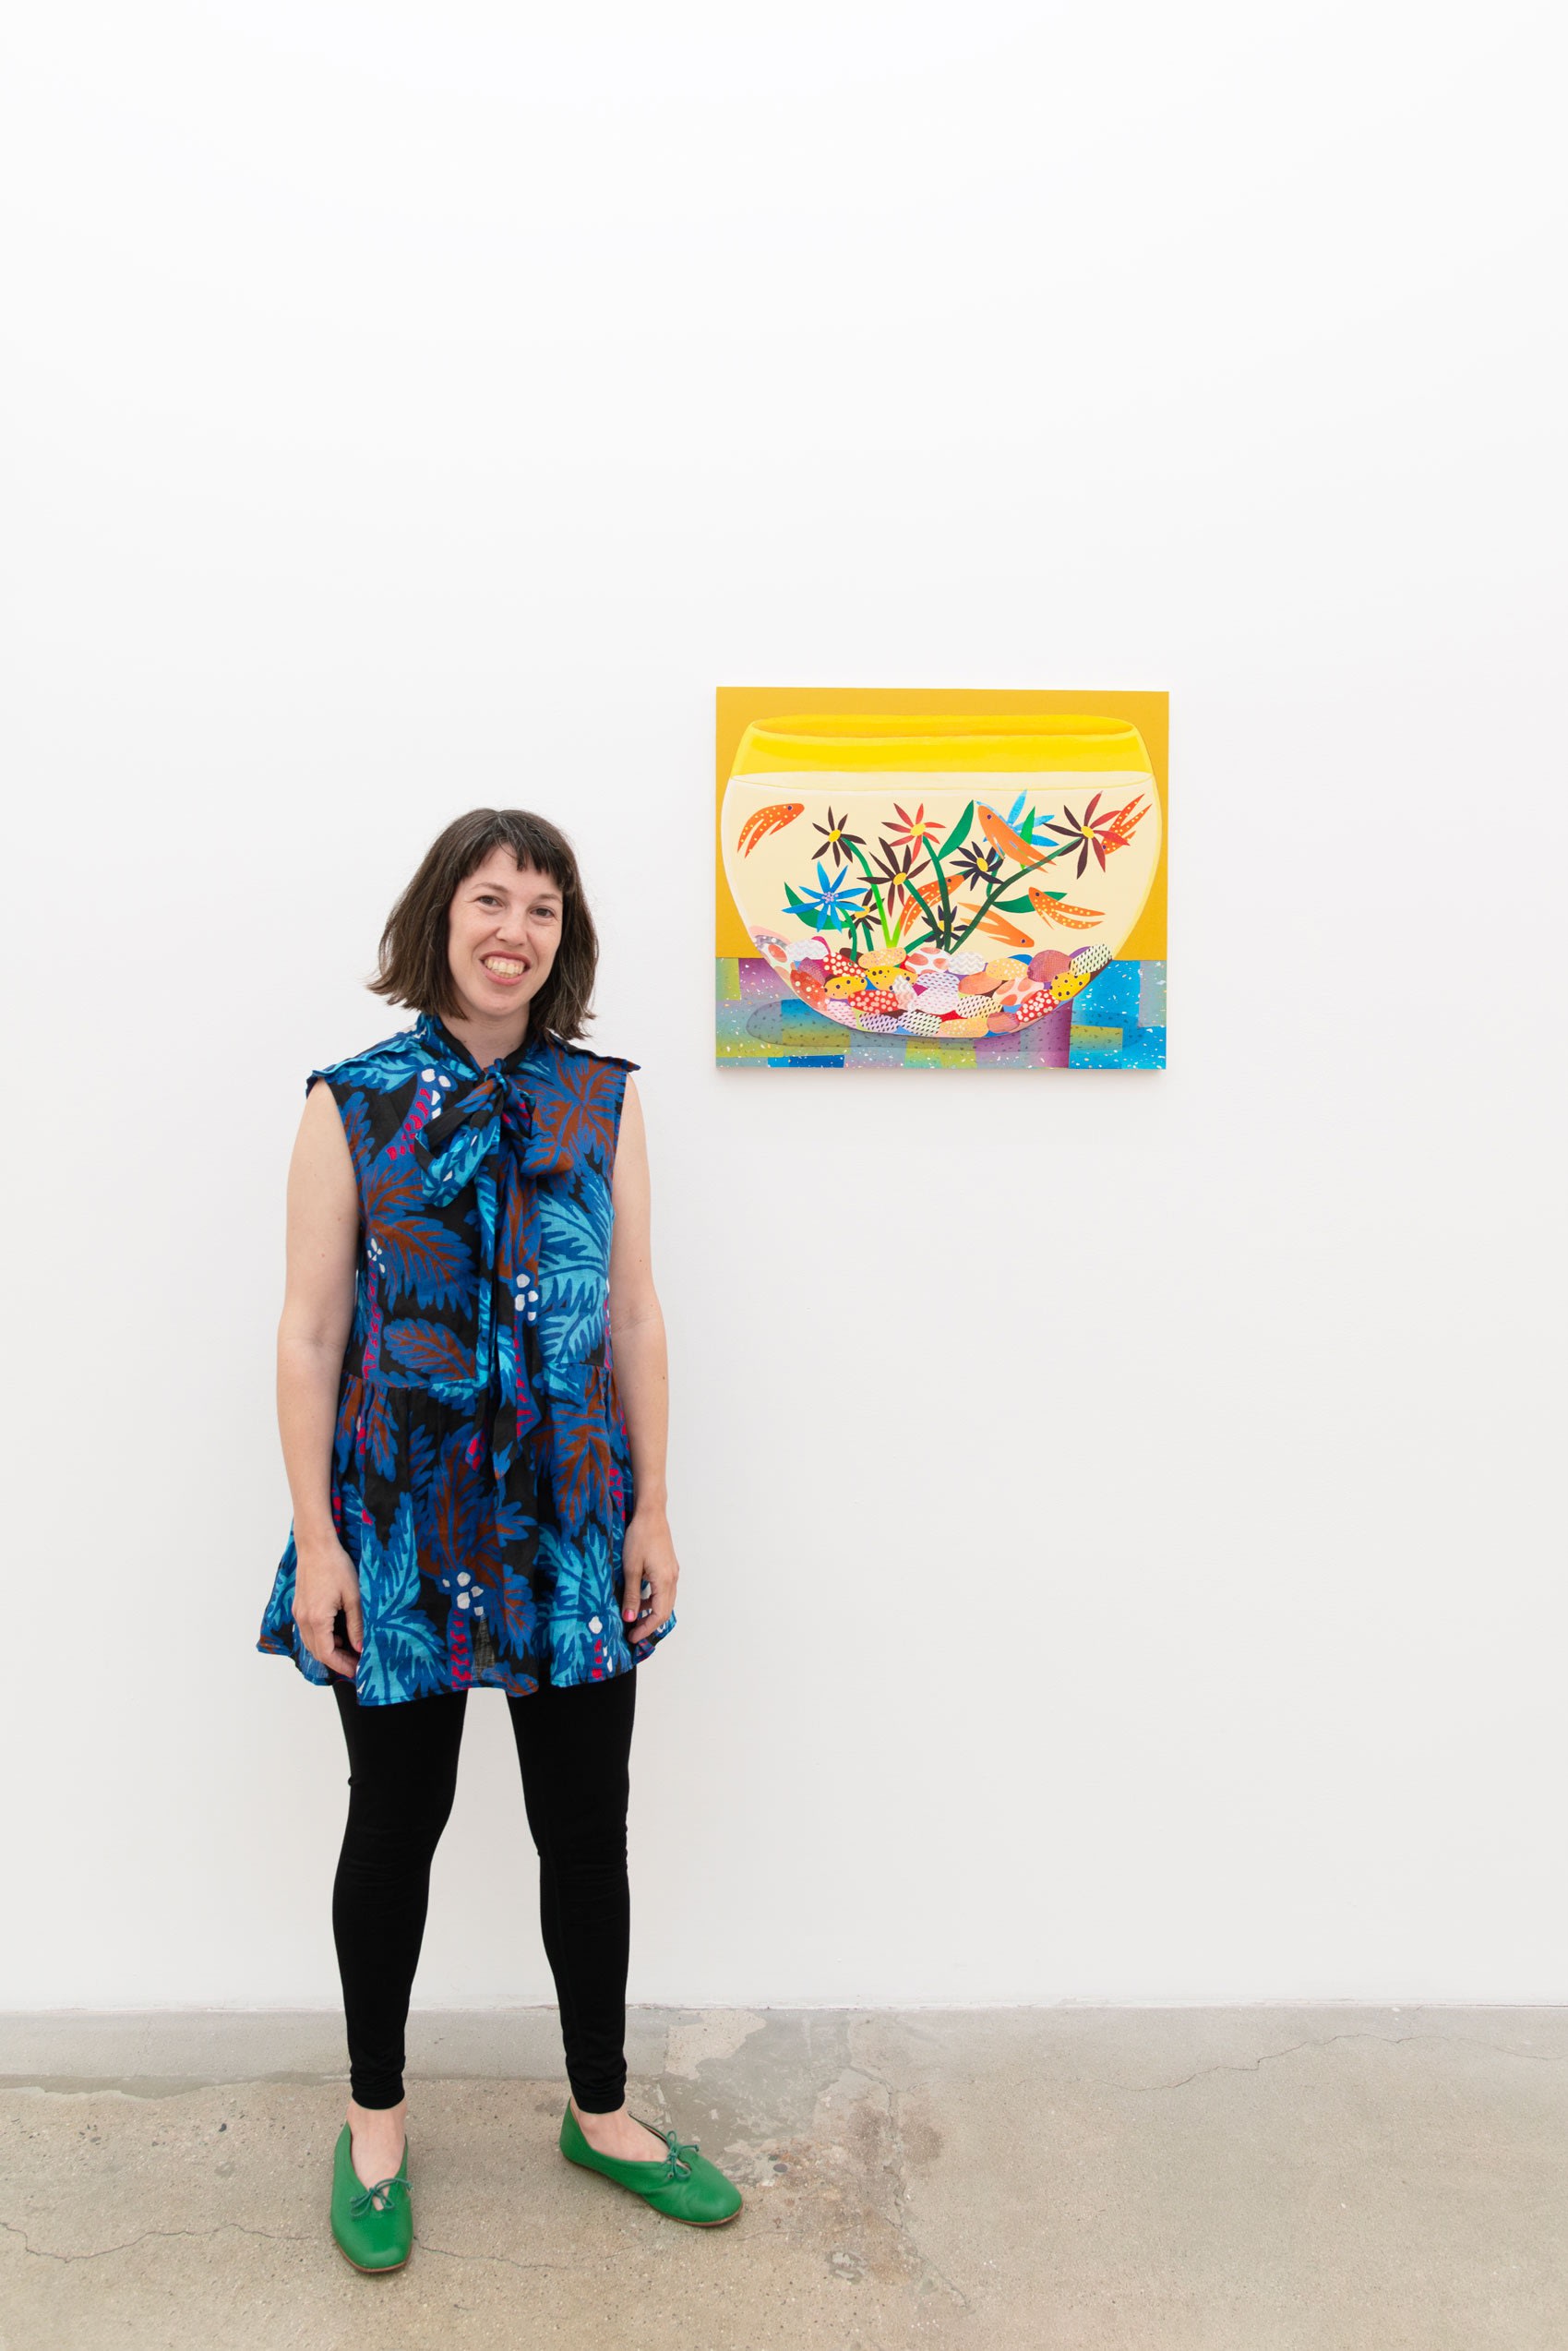 Karen Lederer with her painting at the opening reception of Pith at Hashimoto Contemporary 